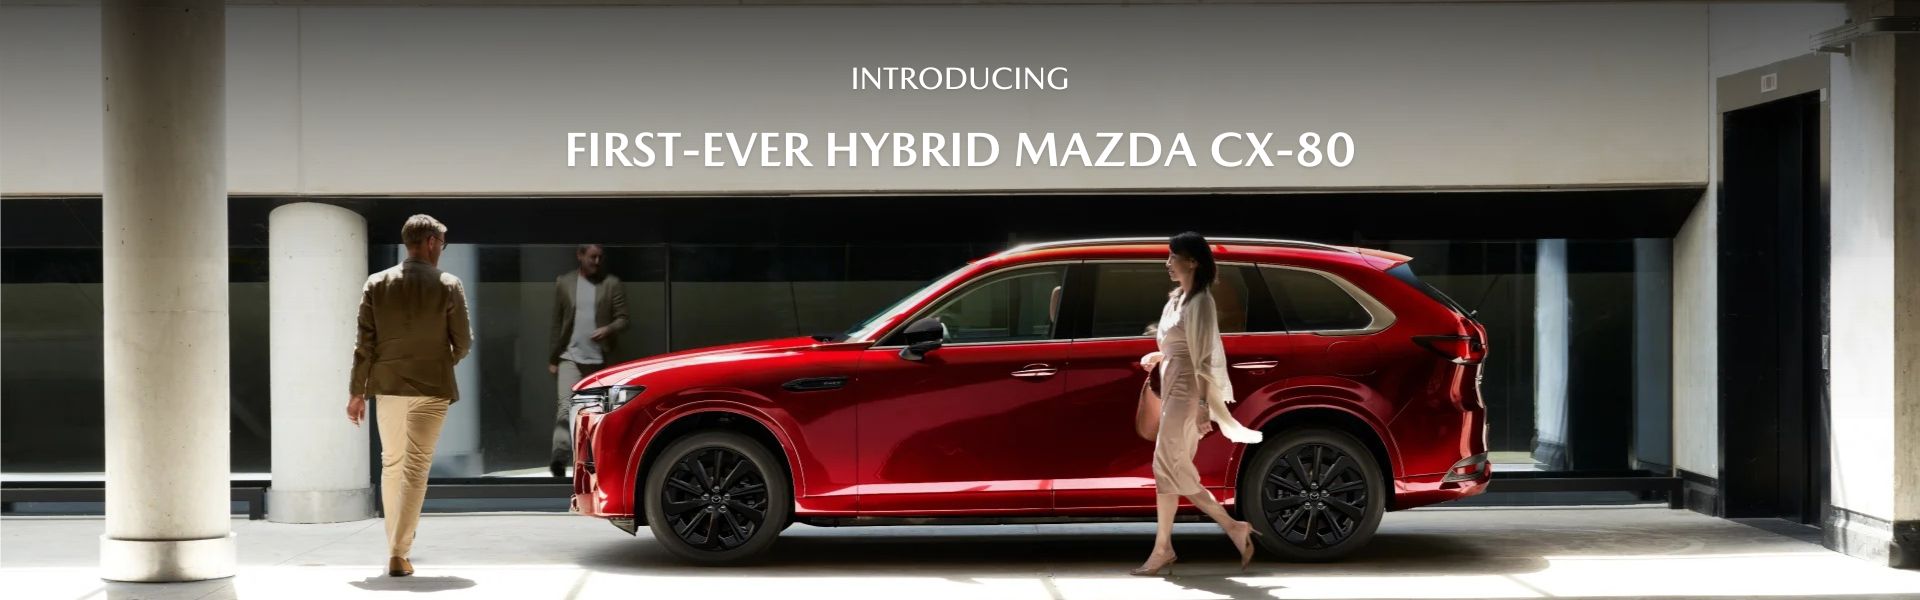 Introducing First-Ever Hybrid Mazda CX-80